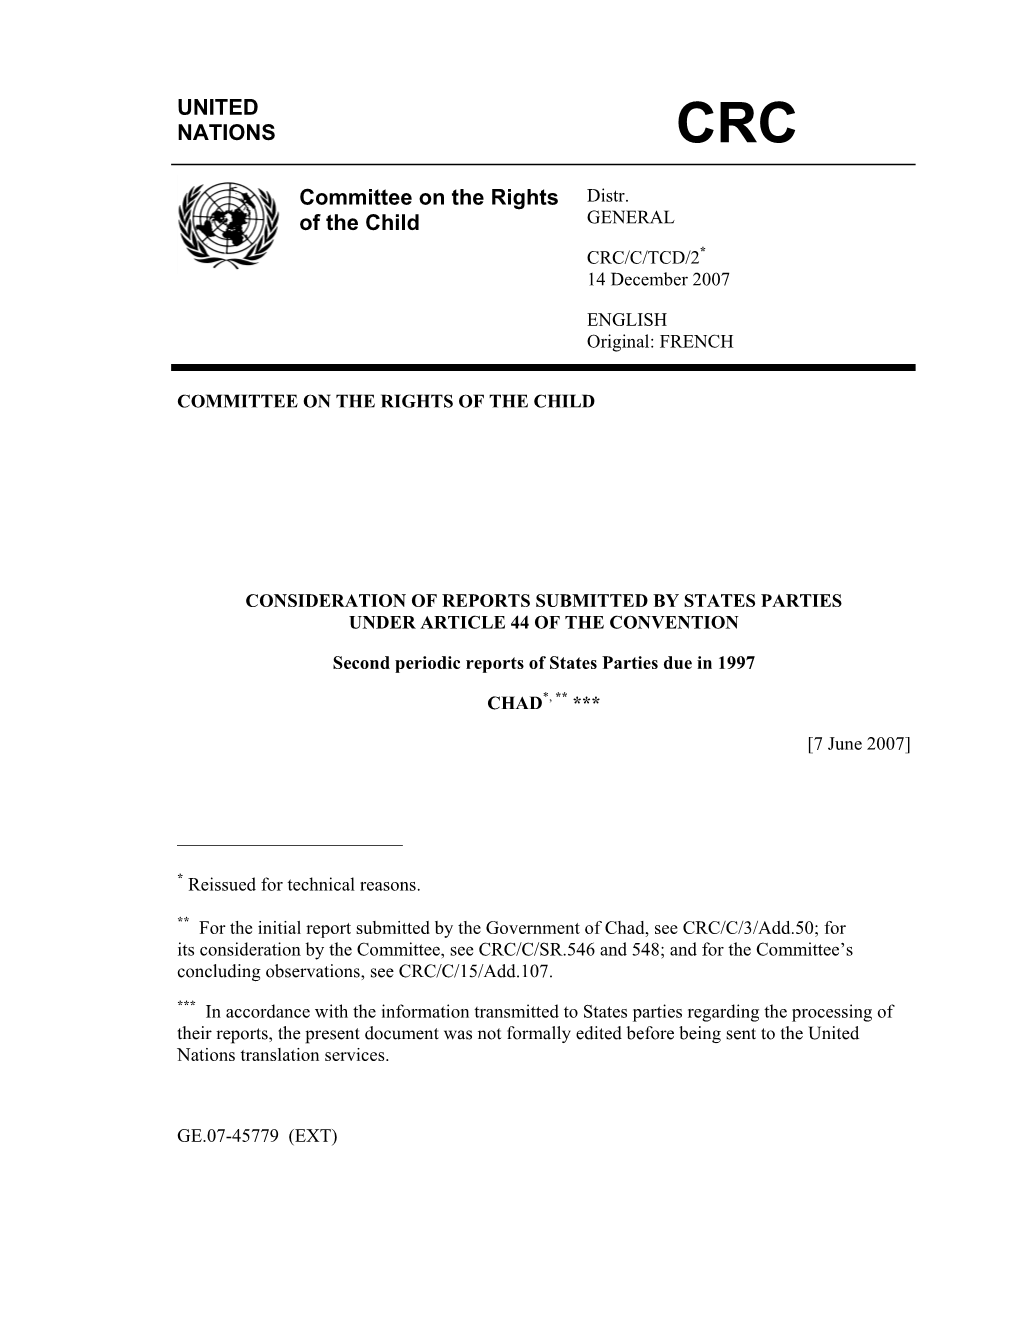 United Nations Committee on the Rights of the Child